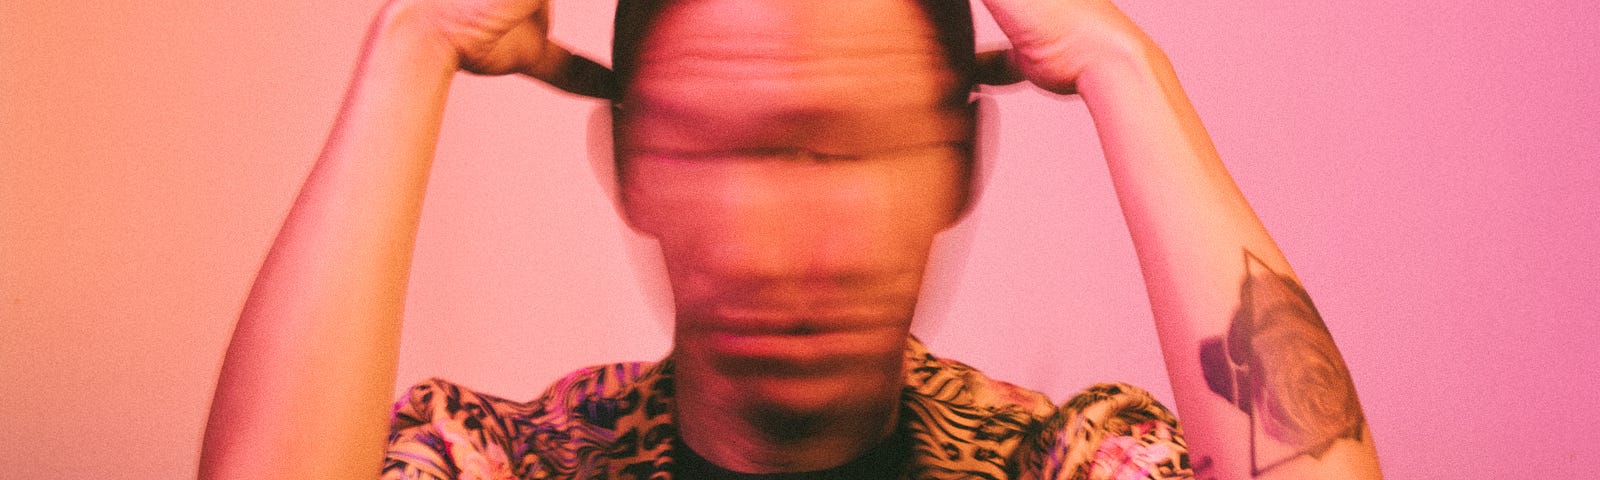 Man shaking head really quickly so his face is blurred with his hands at his head. Frustrated with the million thoughts running through his head.